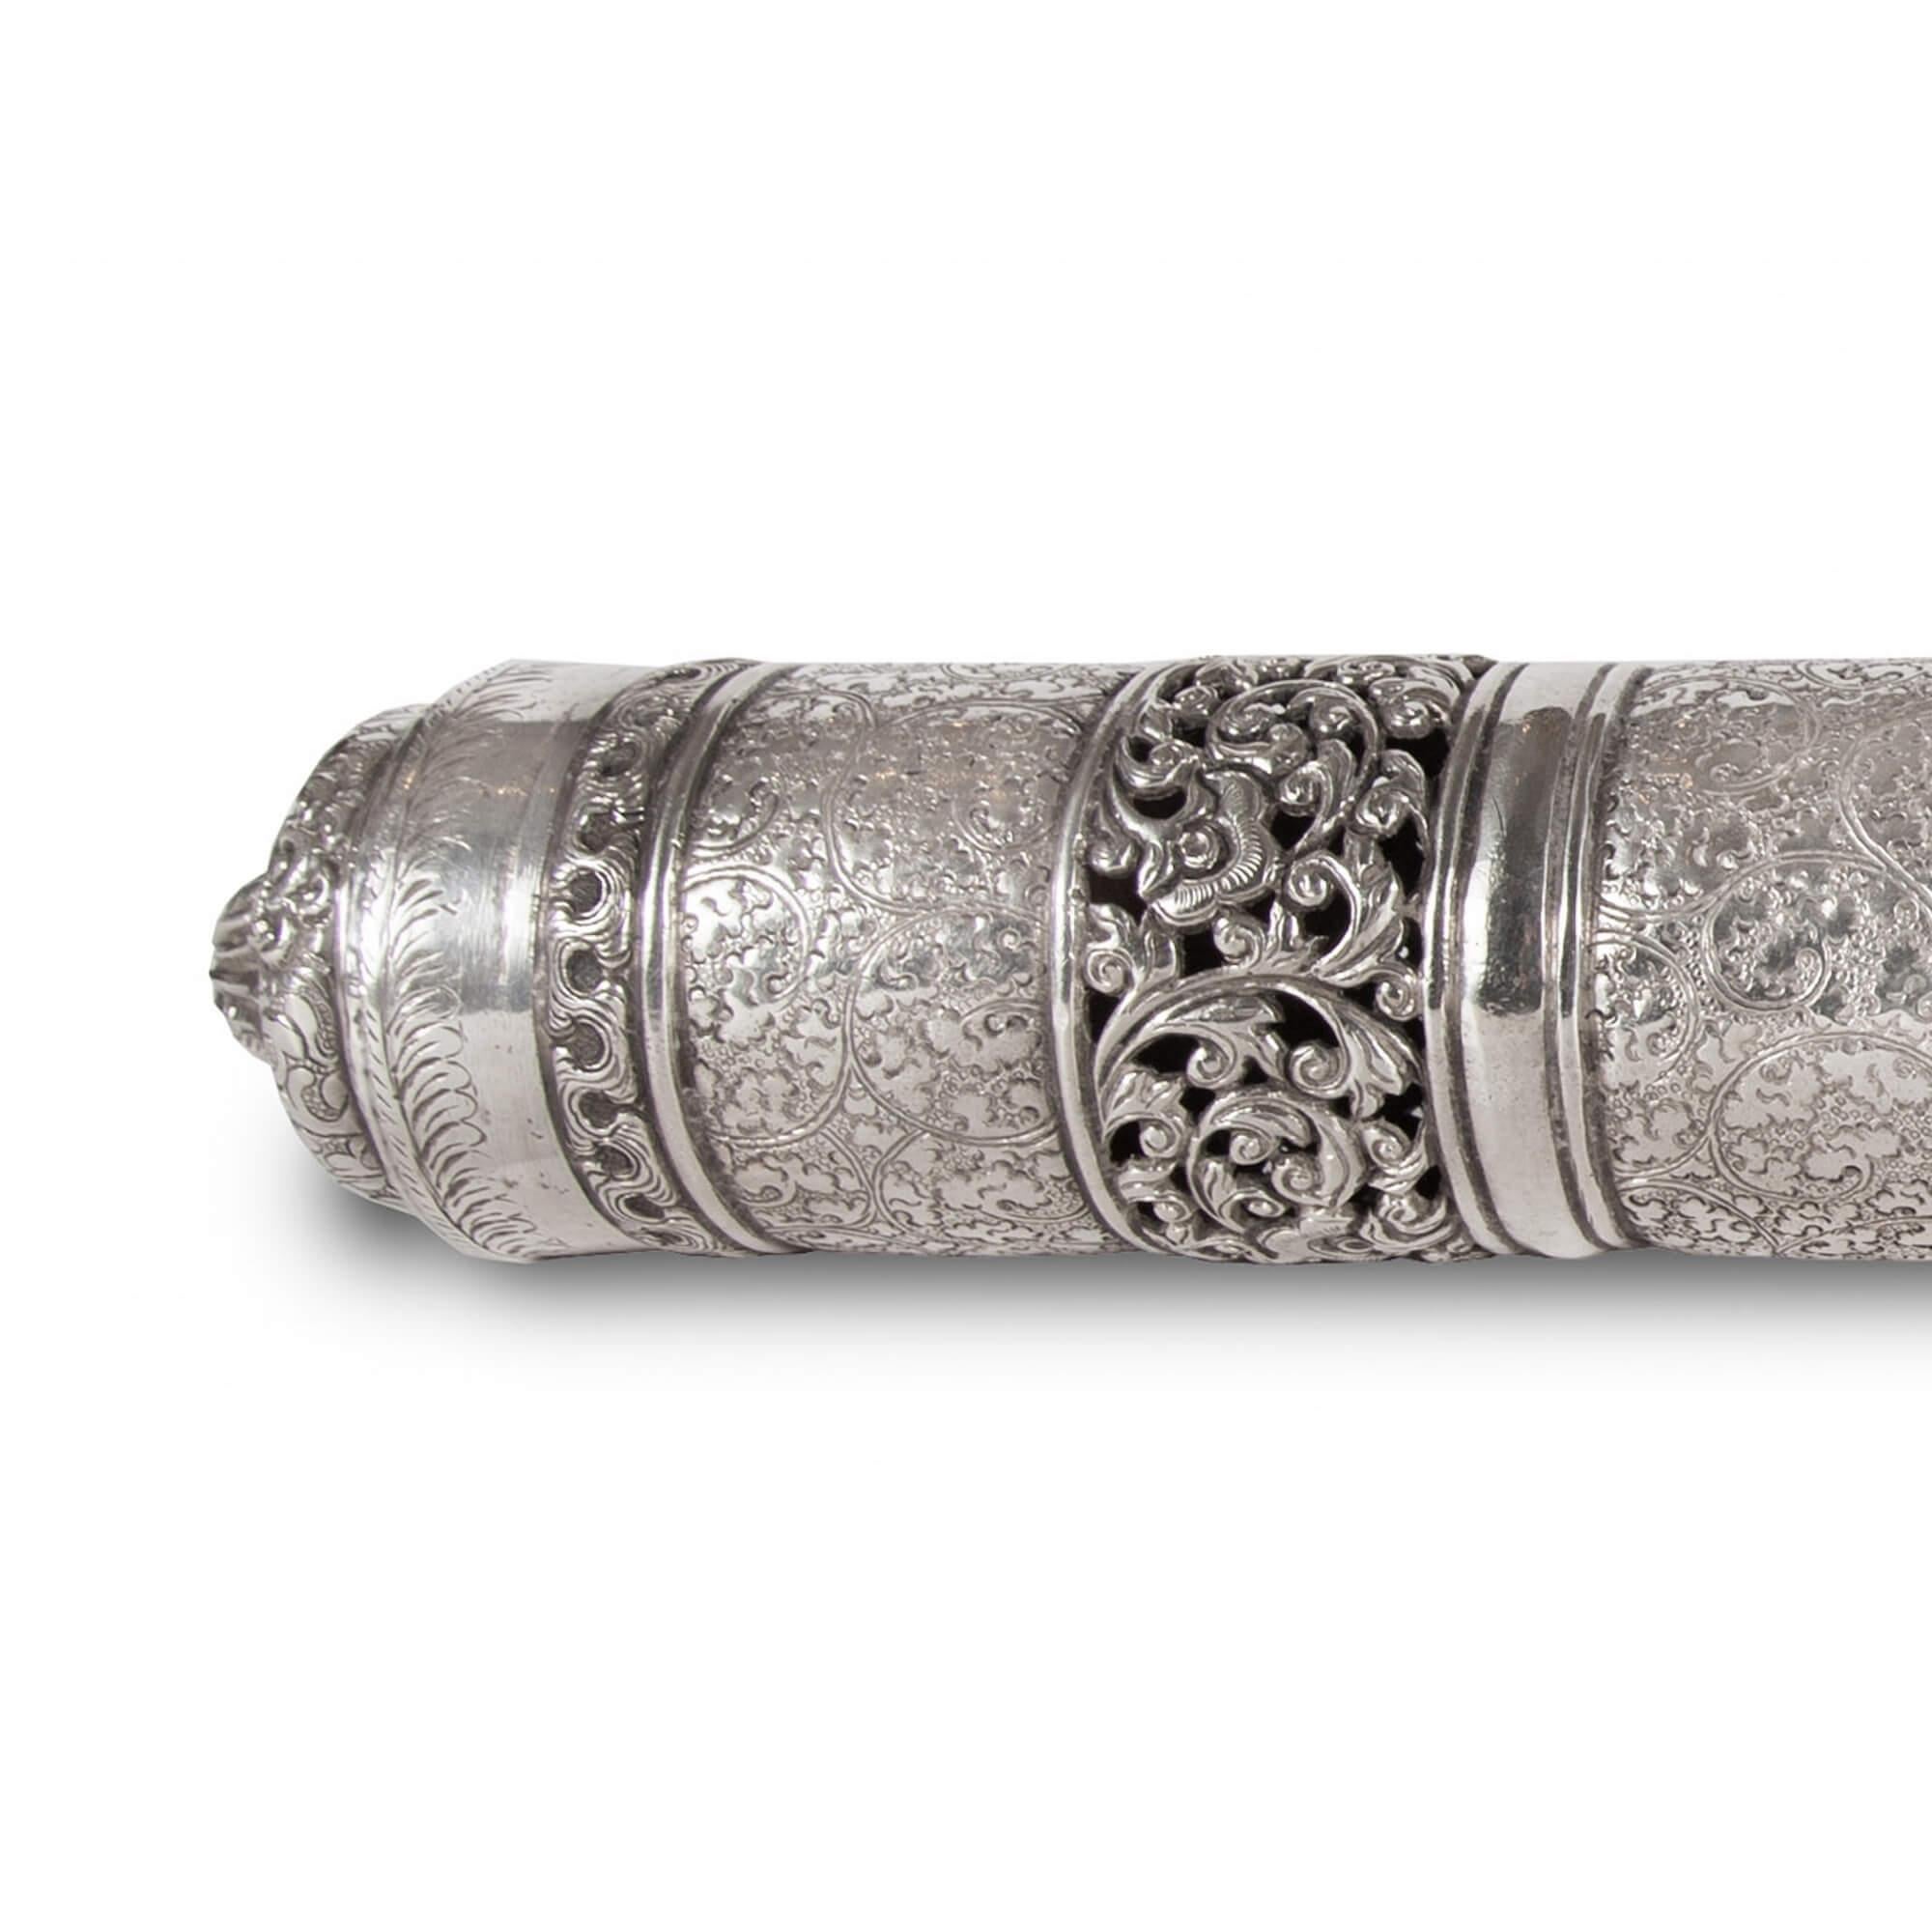 Antique silver document case from Burma
Burmese, late 19th century
Measures: Length 48cm, diameter 6cm

This wonderful object is a Burmese marriage document case. The case is cylindrical in form, and its silver surface is profusely adorned with